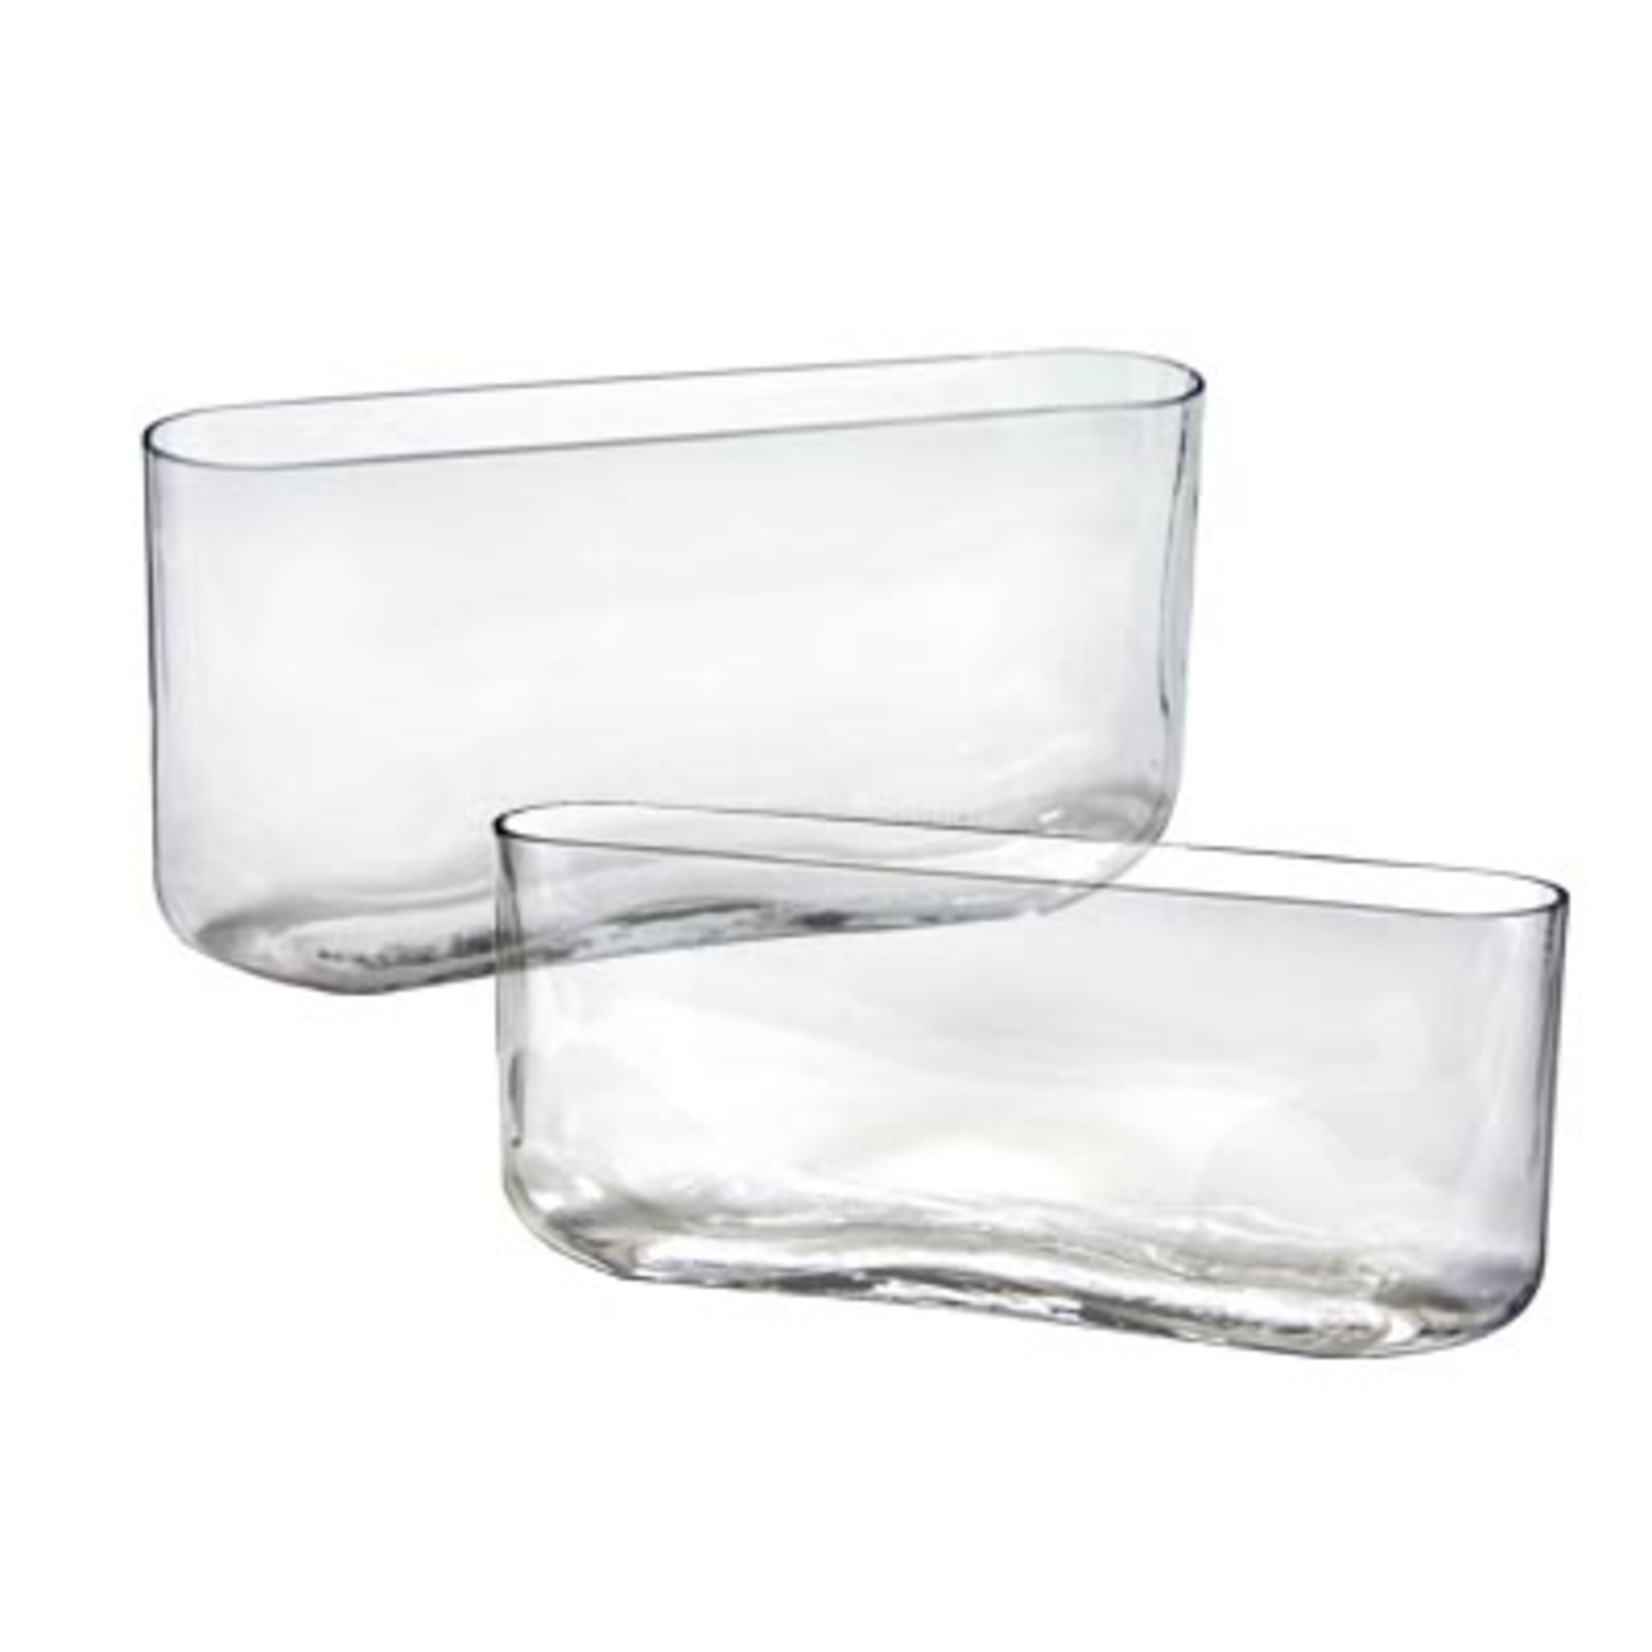 Clear Large Ovals H-8"" x Top-16""x3""